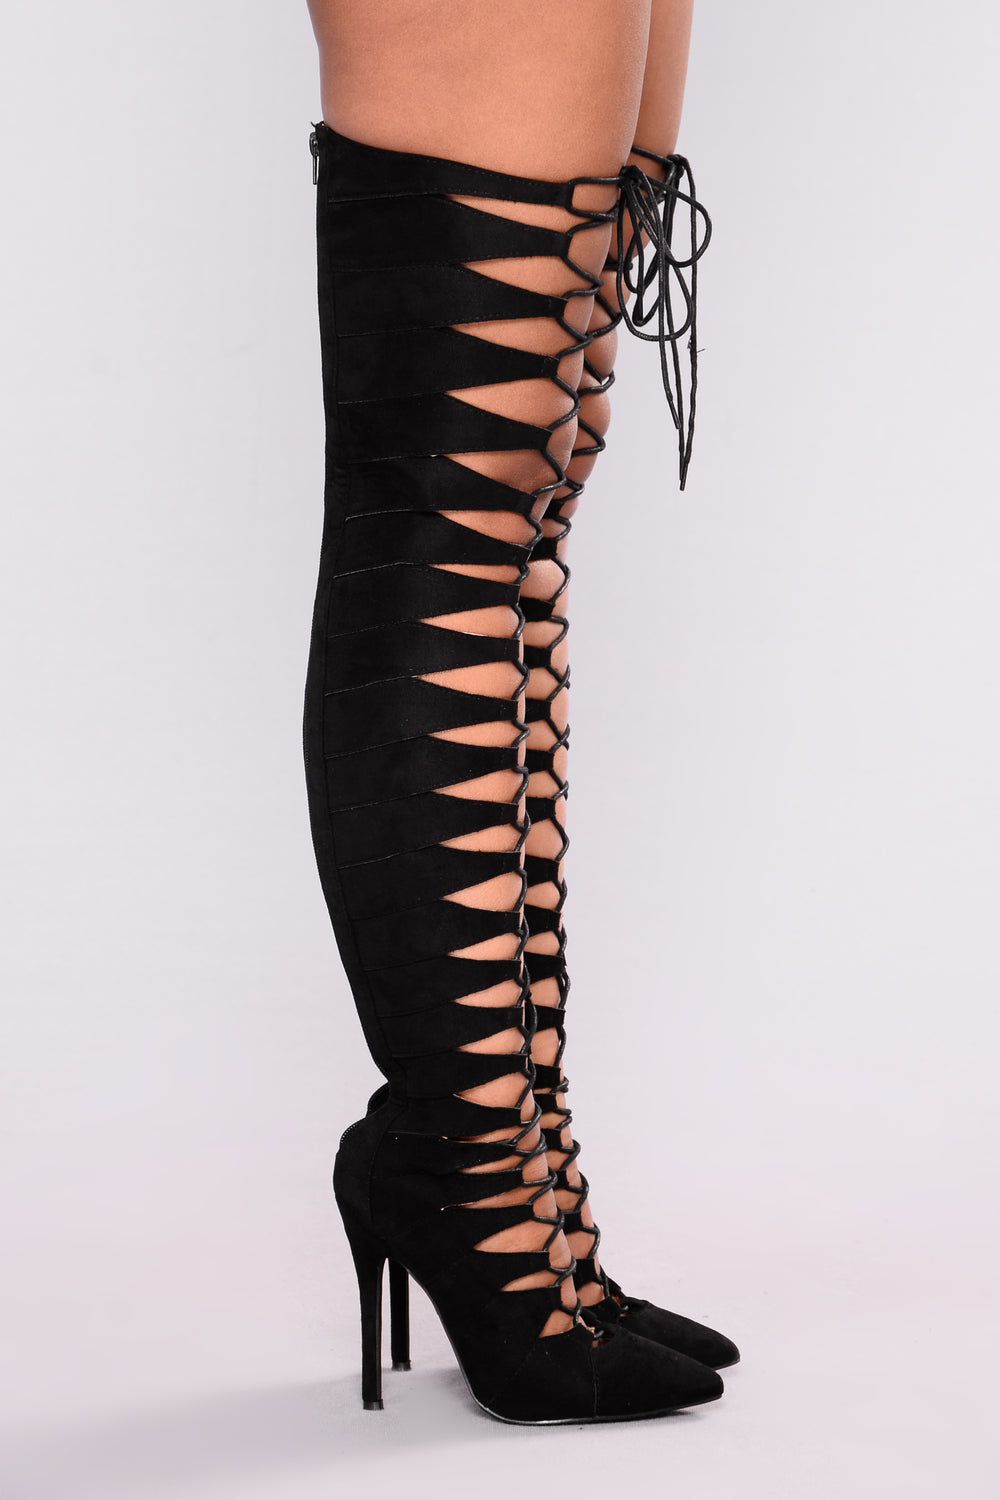 Cut It Out Boot - Black